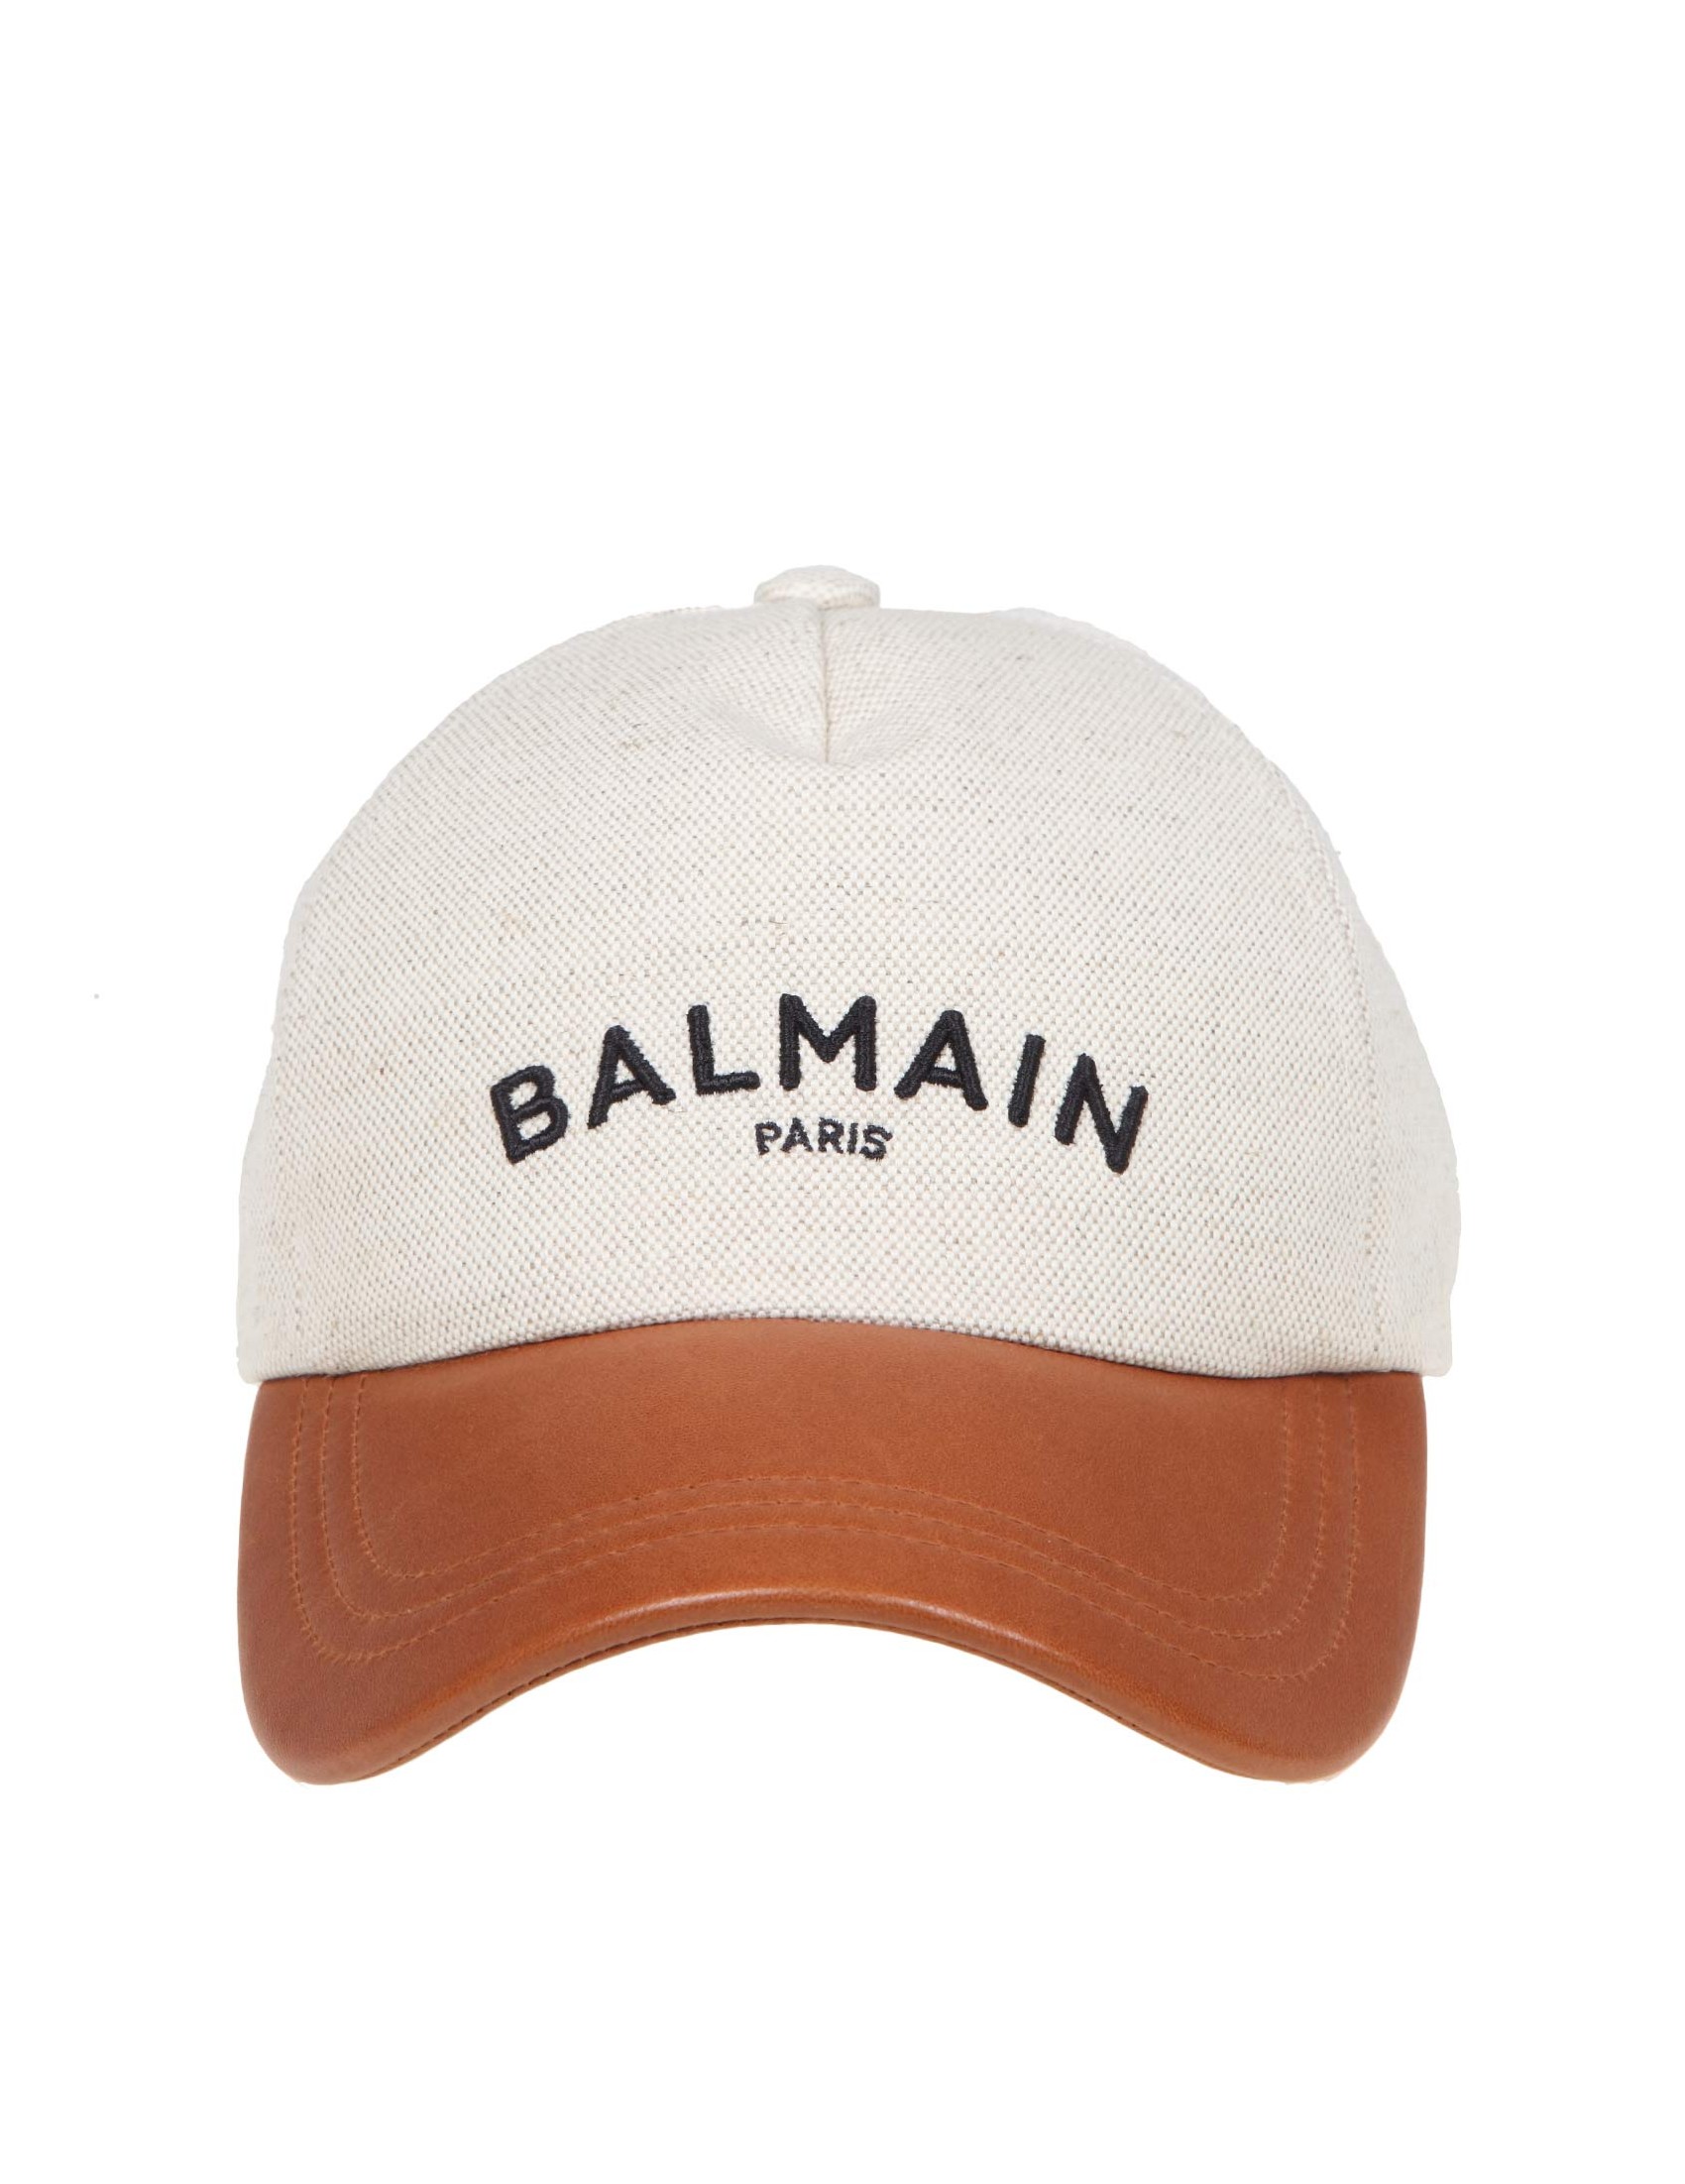 BALMAIN COTTON AND LEATHER HAT WITH EMBROIDERED LOGO